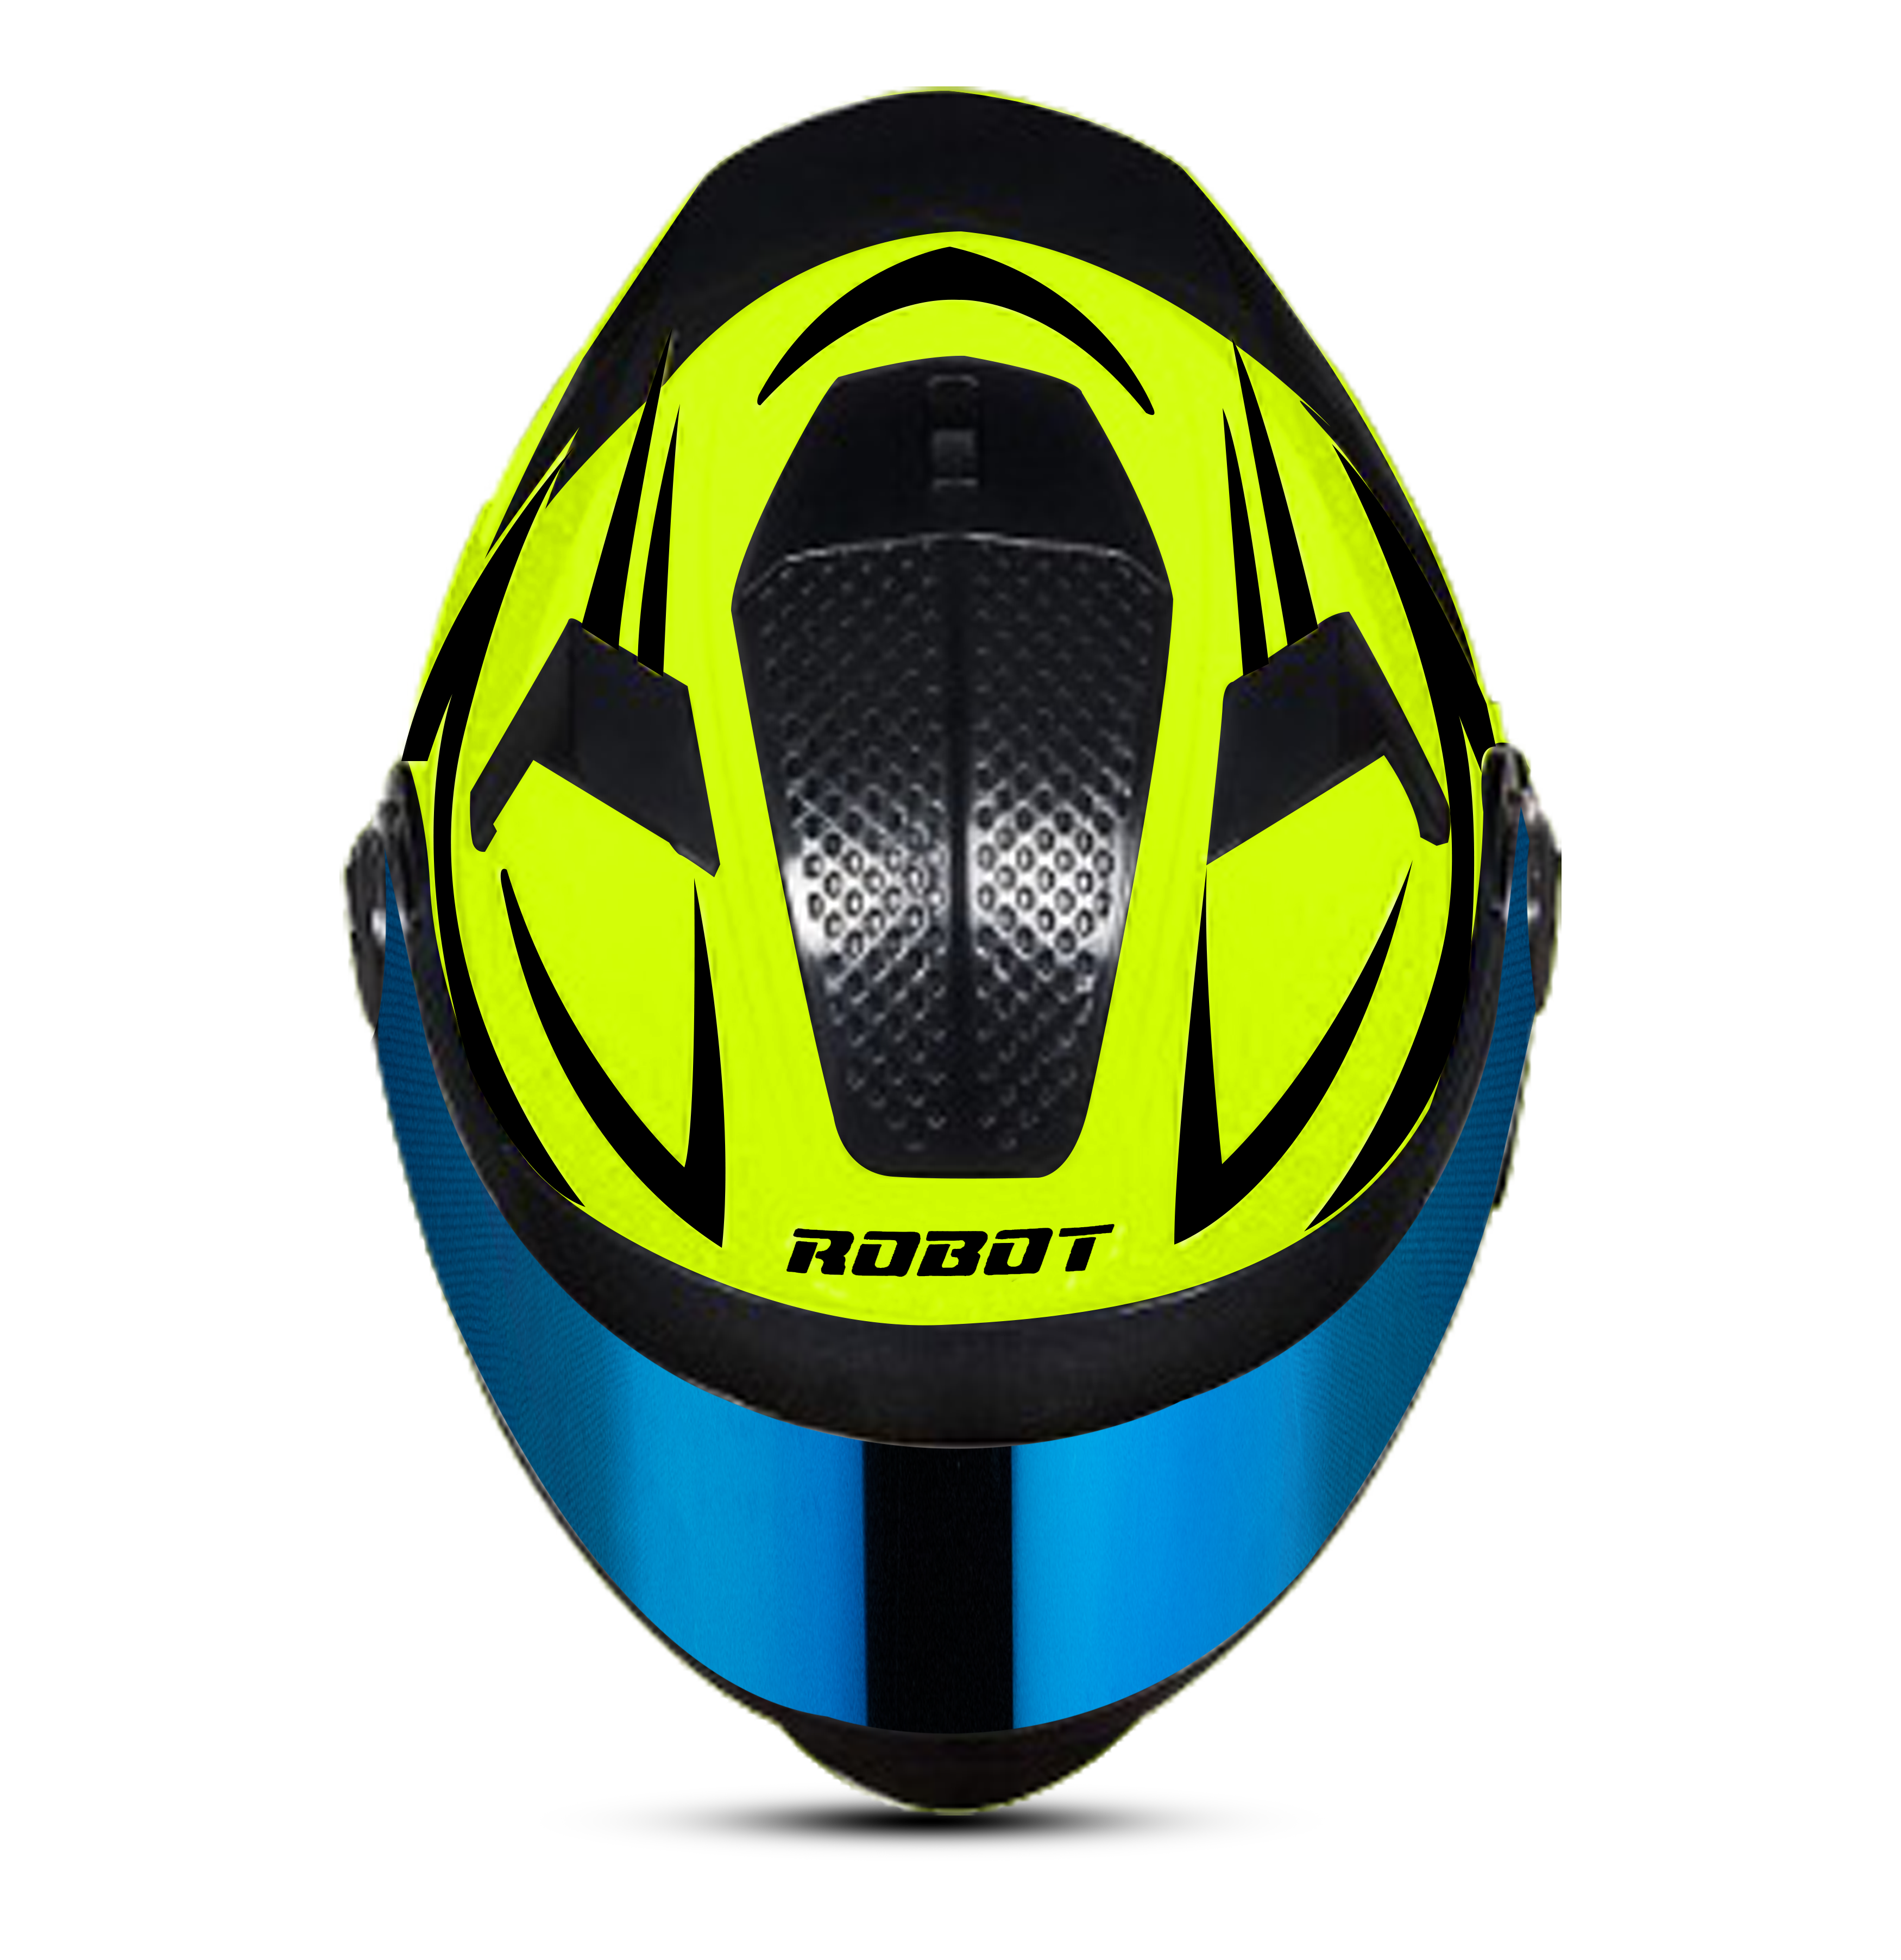 SBH-17 ROBOT REFLECTIVE GLOSSY FLUO NEON (FITTED WITH CLEAR VISOR EXTRA BLUE CHROME VISOR FREE)